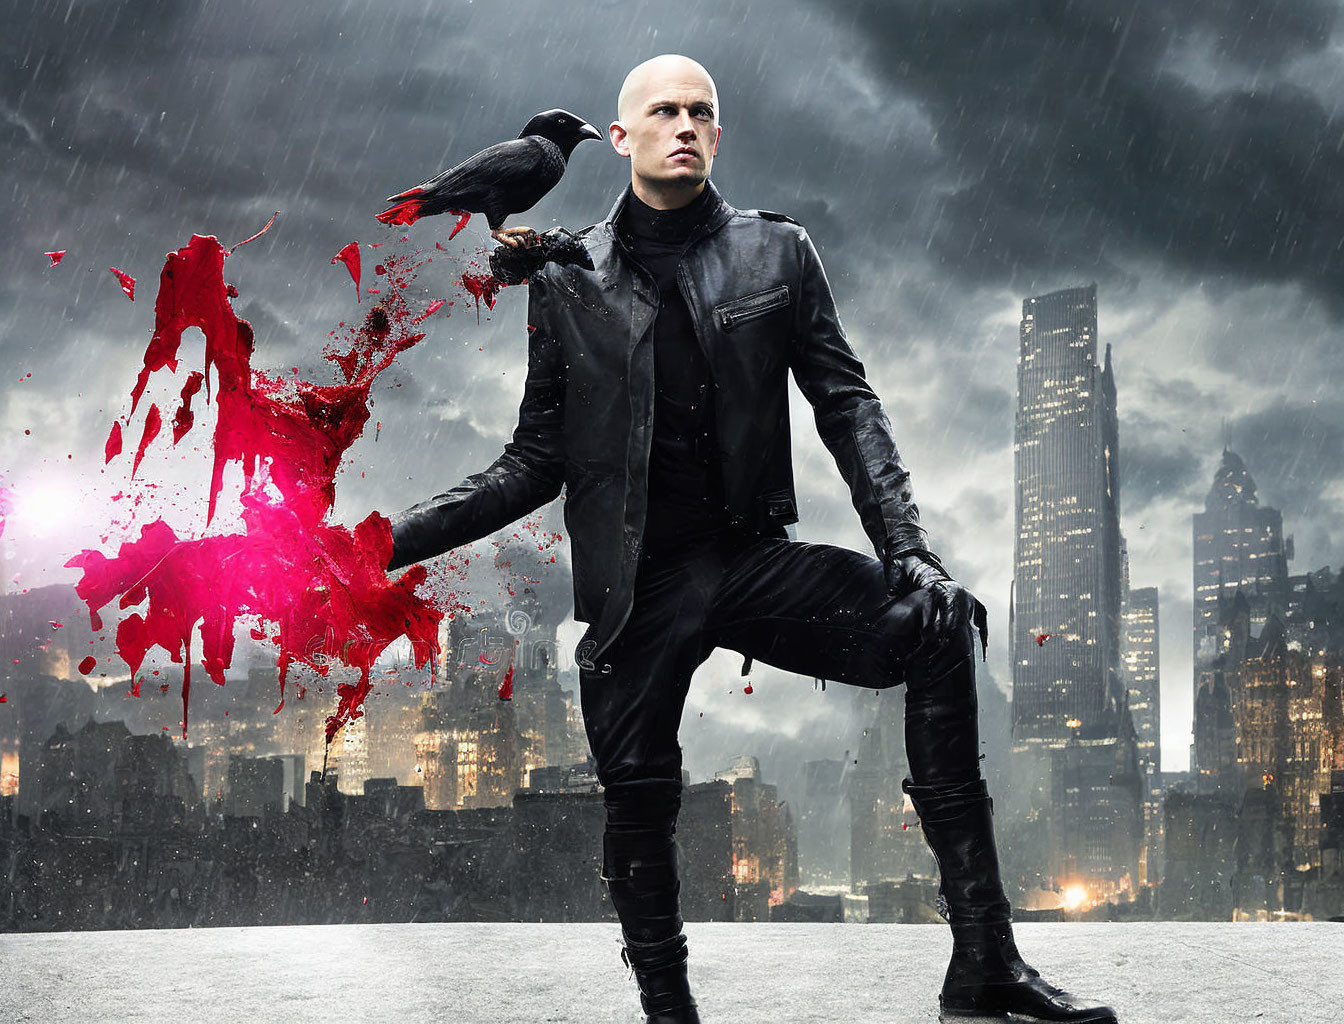 Bald Man in Black Leather with Raven under Stormy Sky